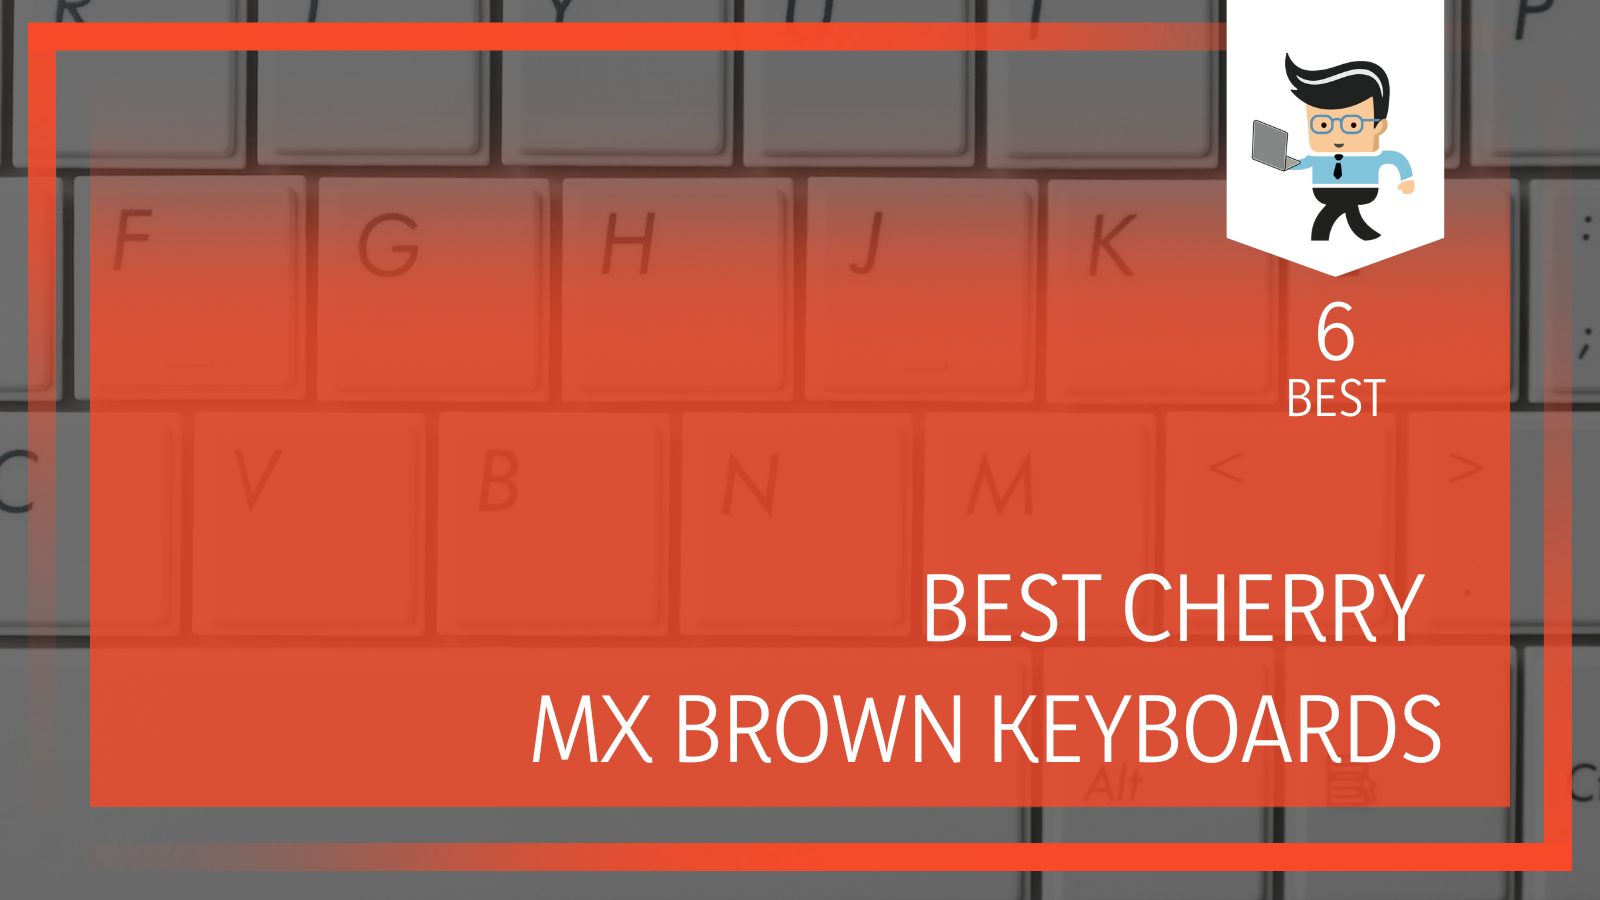 The Cherry mx brown keyboard types scaled